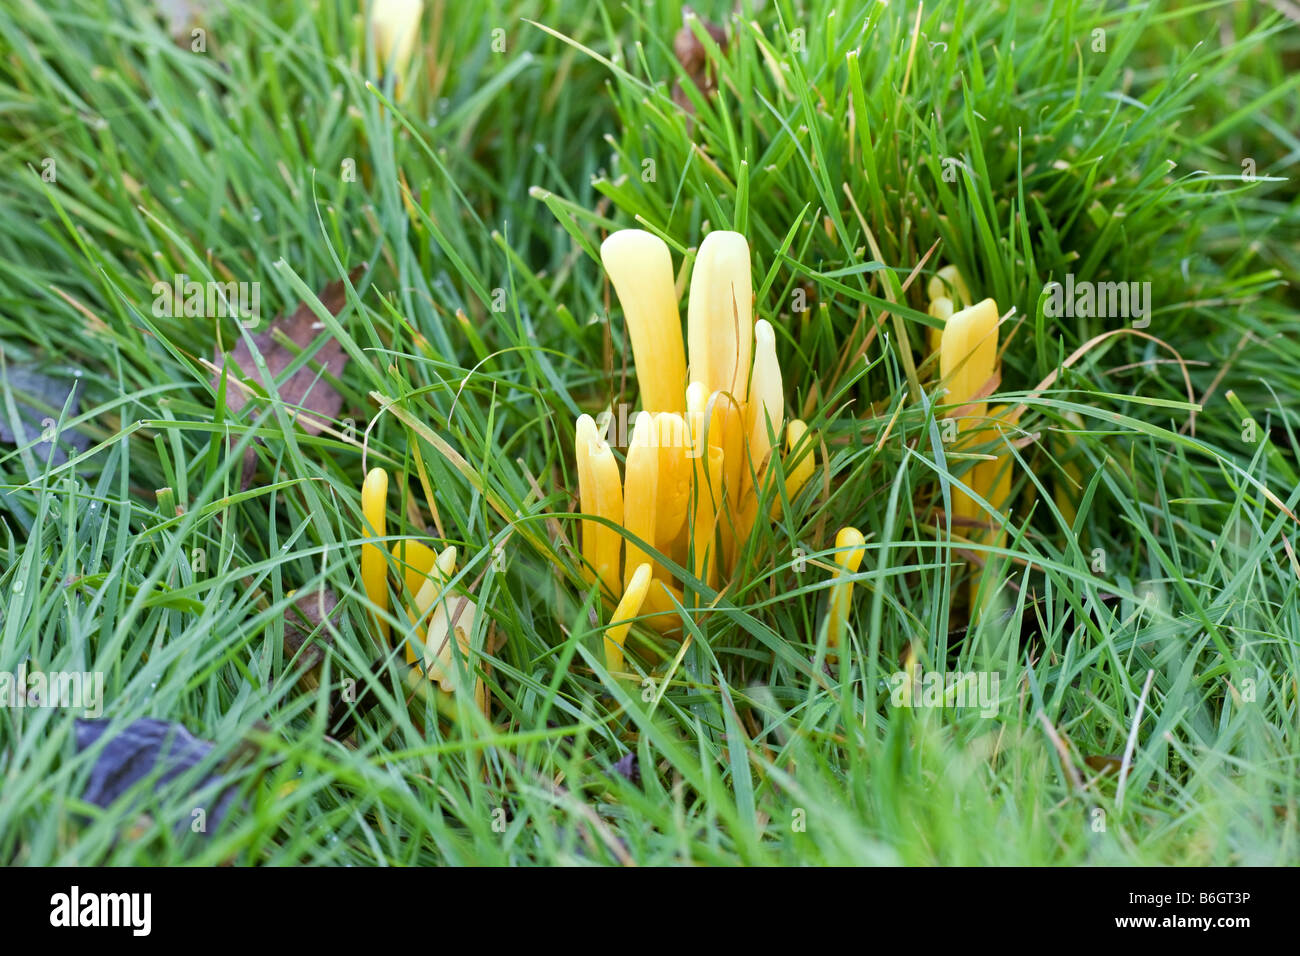 Golden Spindles Clavulinpsis fusiformis fungi fruiting bodies growing in grassland Stock Photo